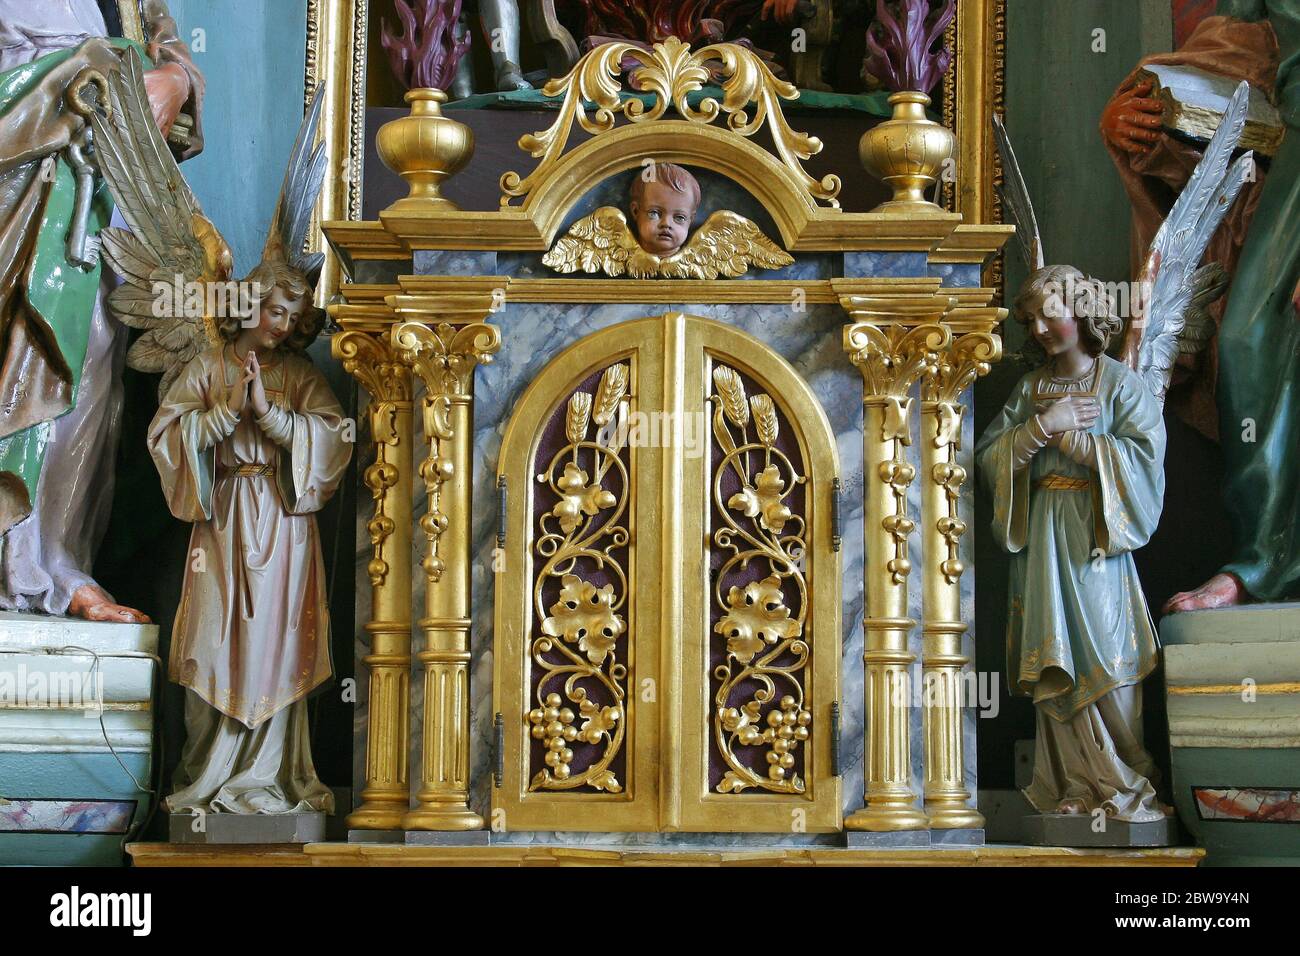 Tabernacle on the main altar in the Church of St. Vitus in Brdovec, Croatia Stock Photo